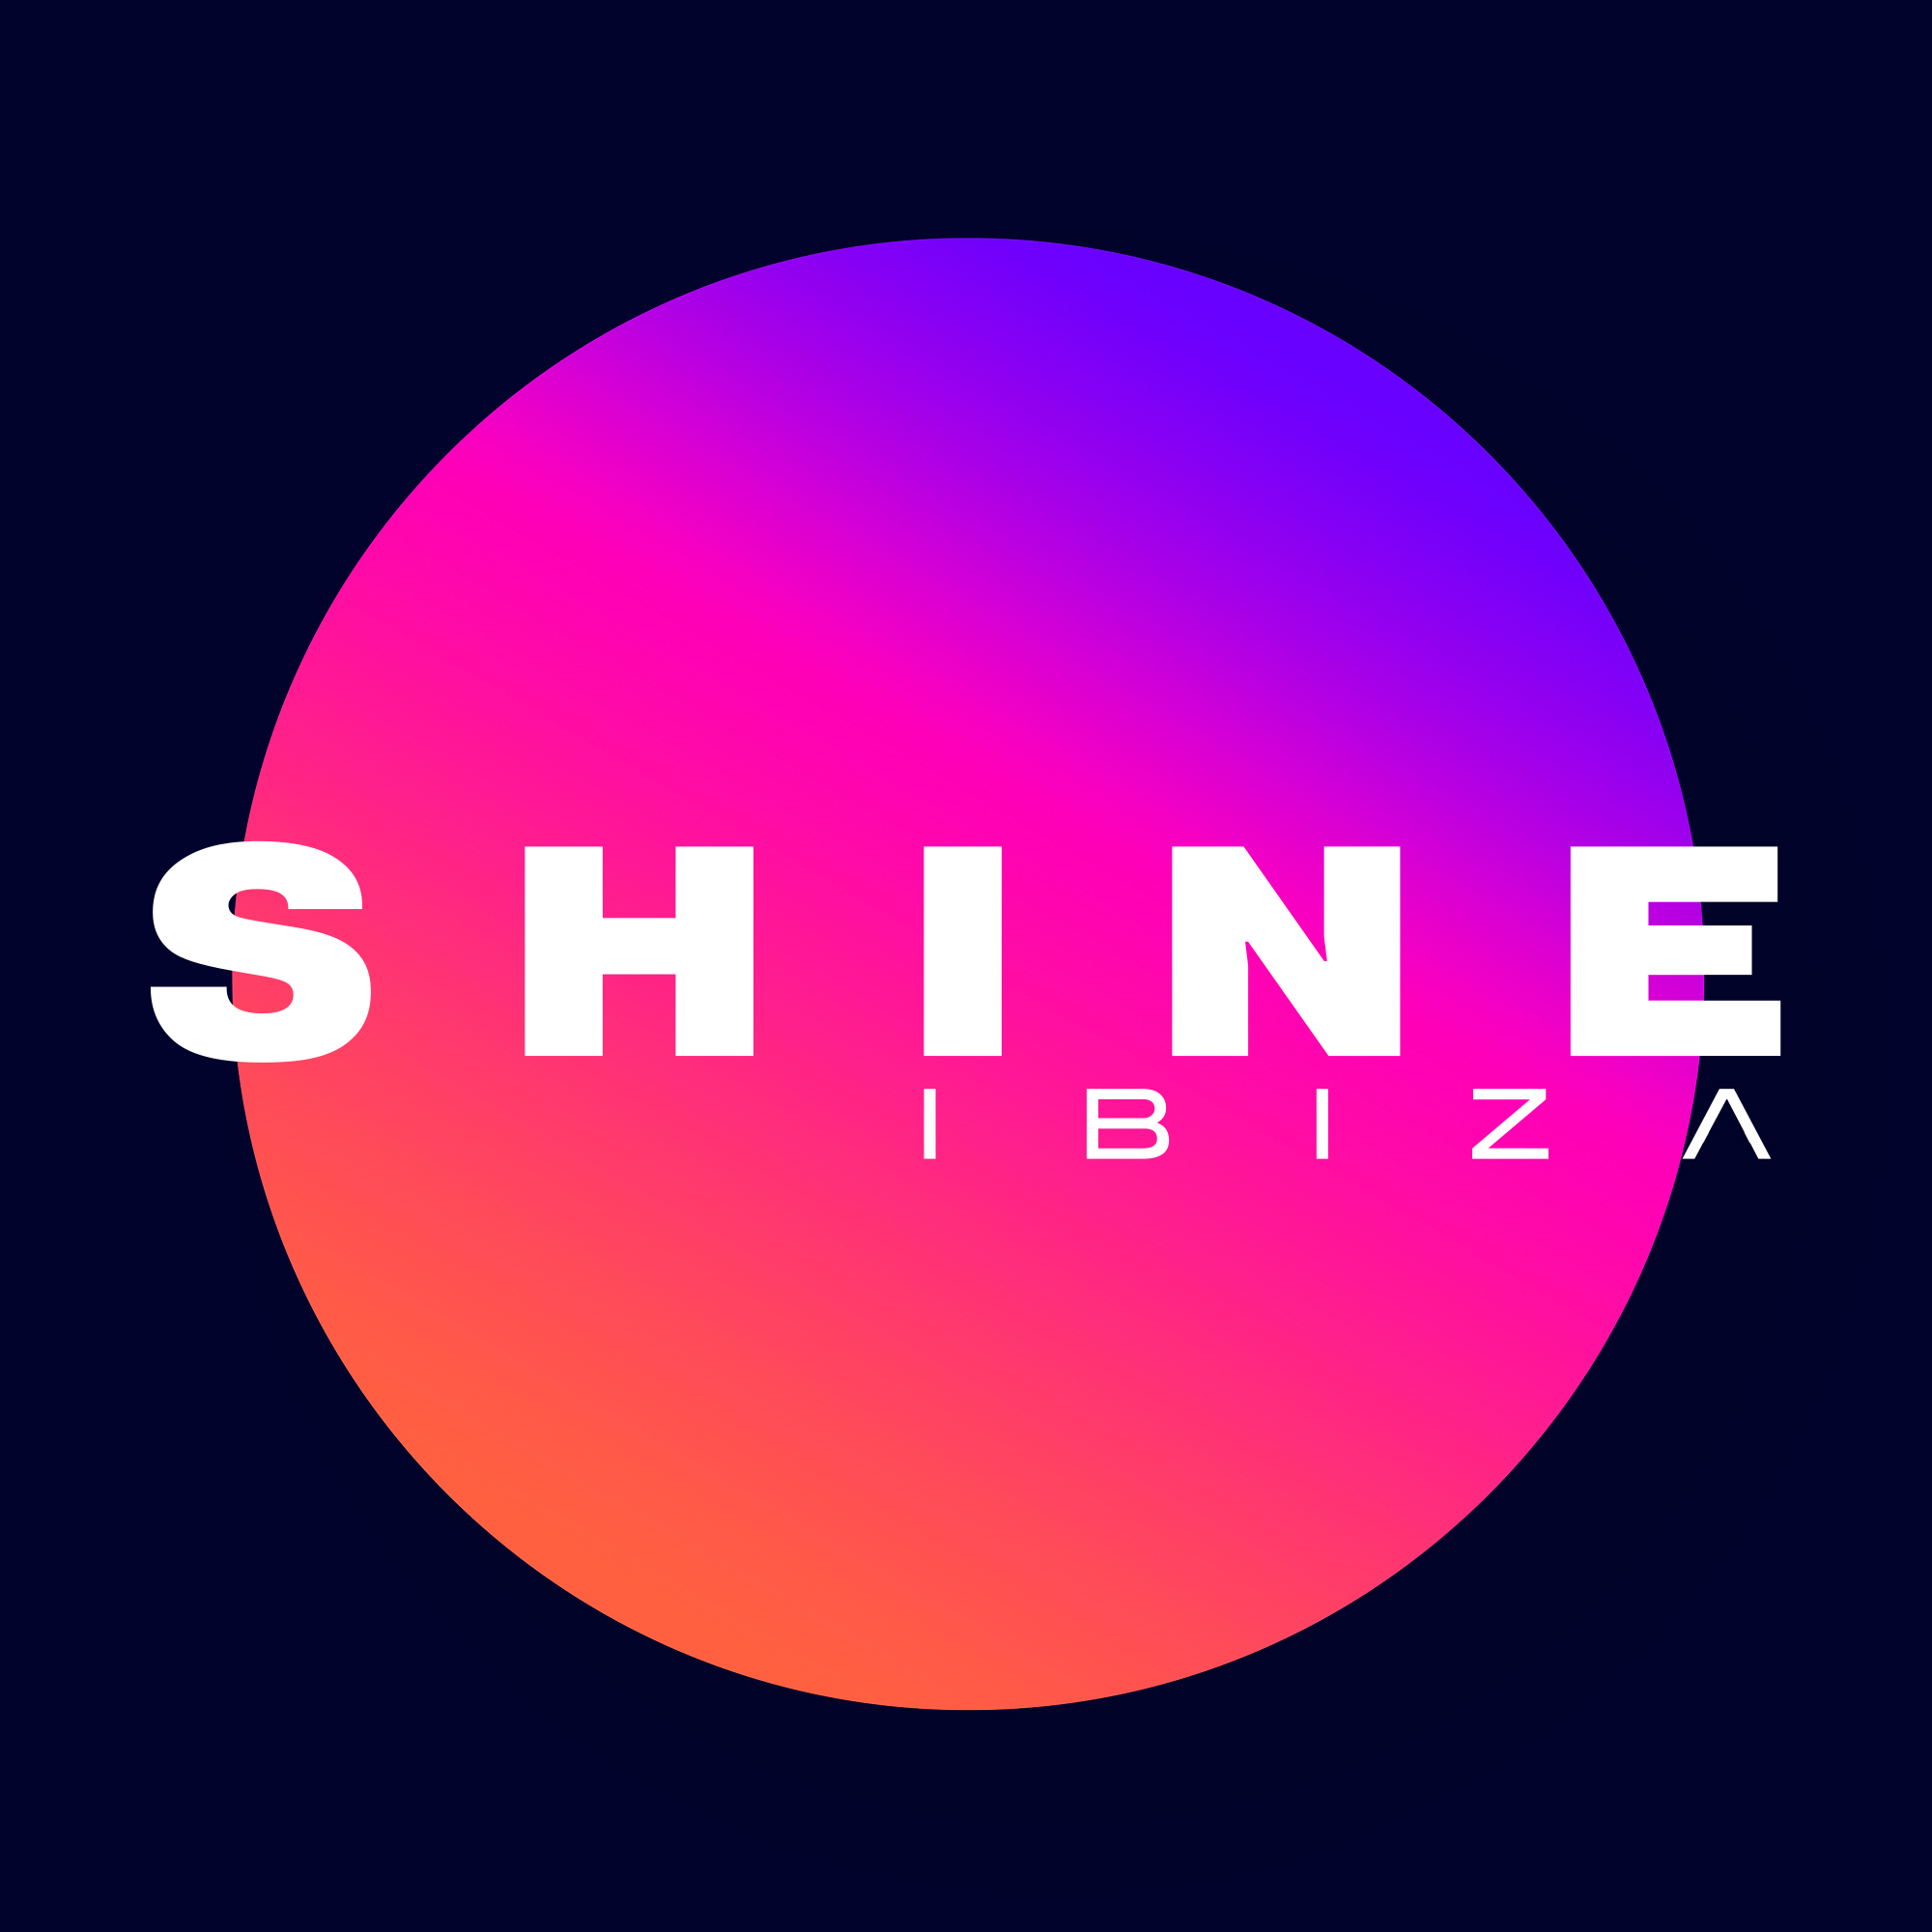 Shine Ibiza - The new destination for Trance in Ibiza with Paul van Dyk